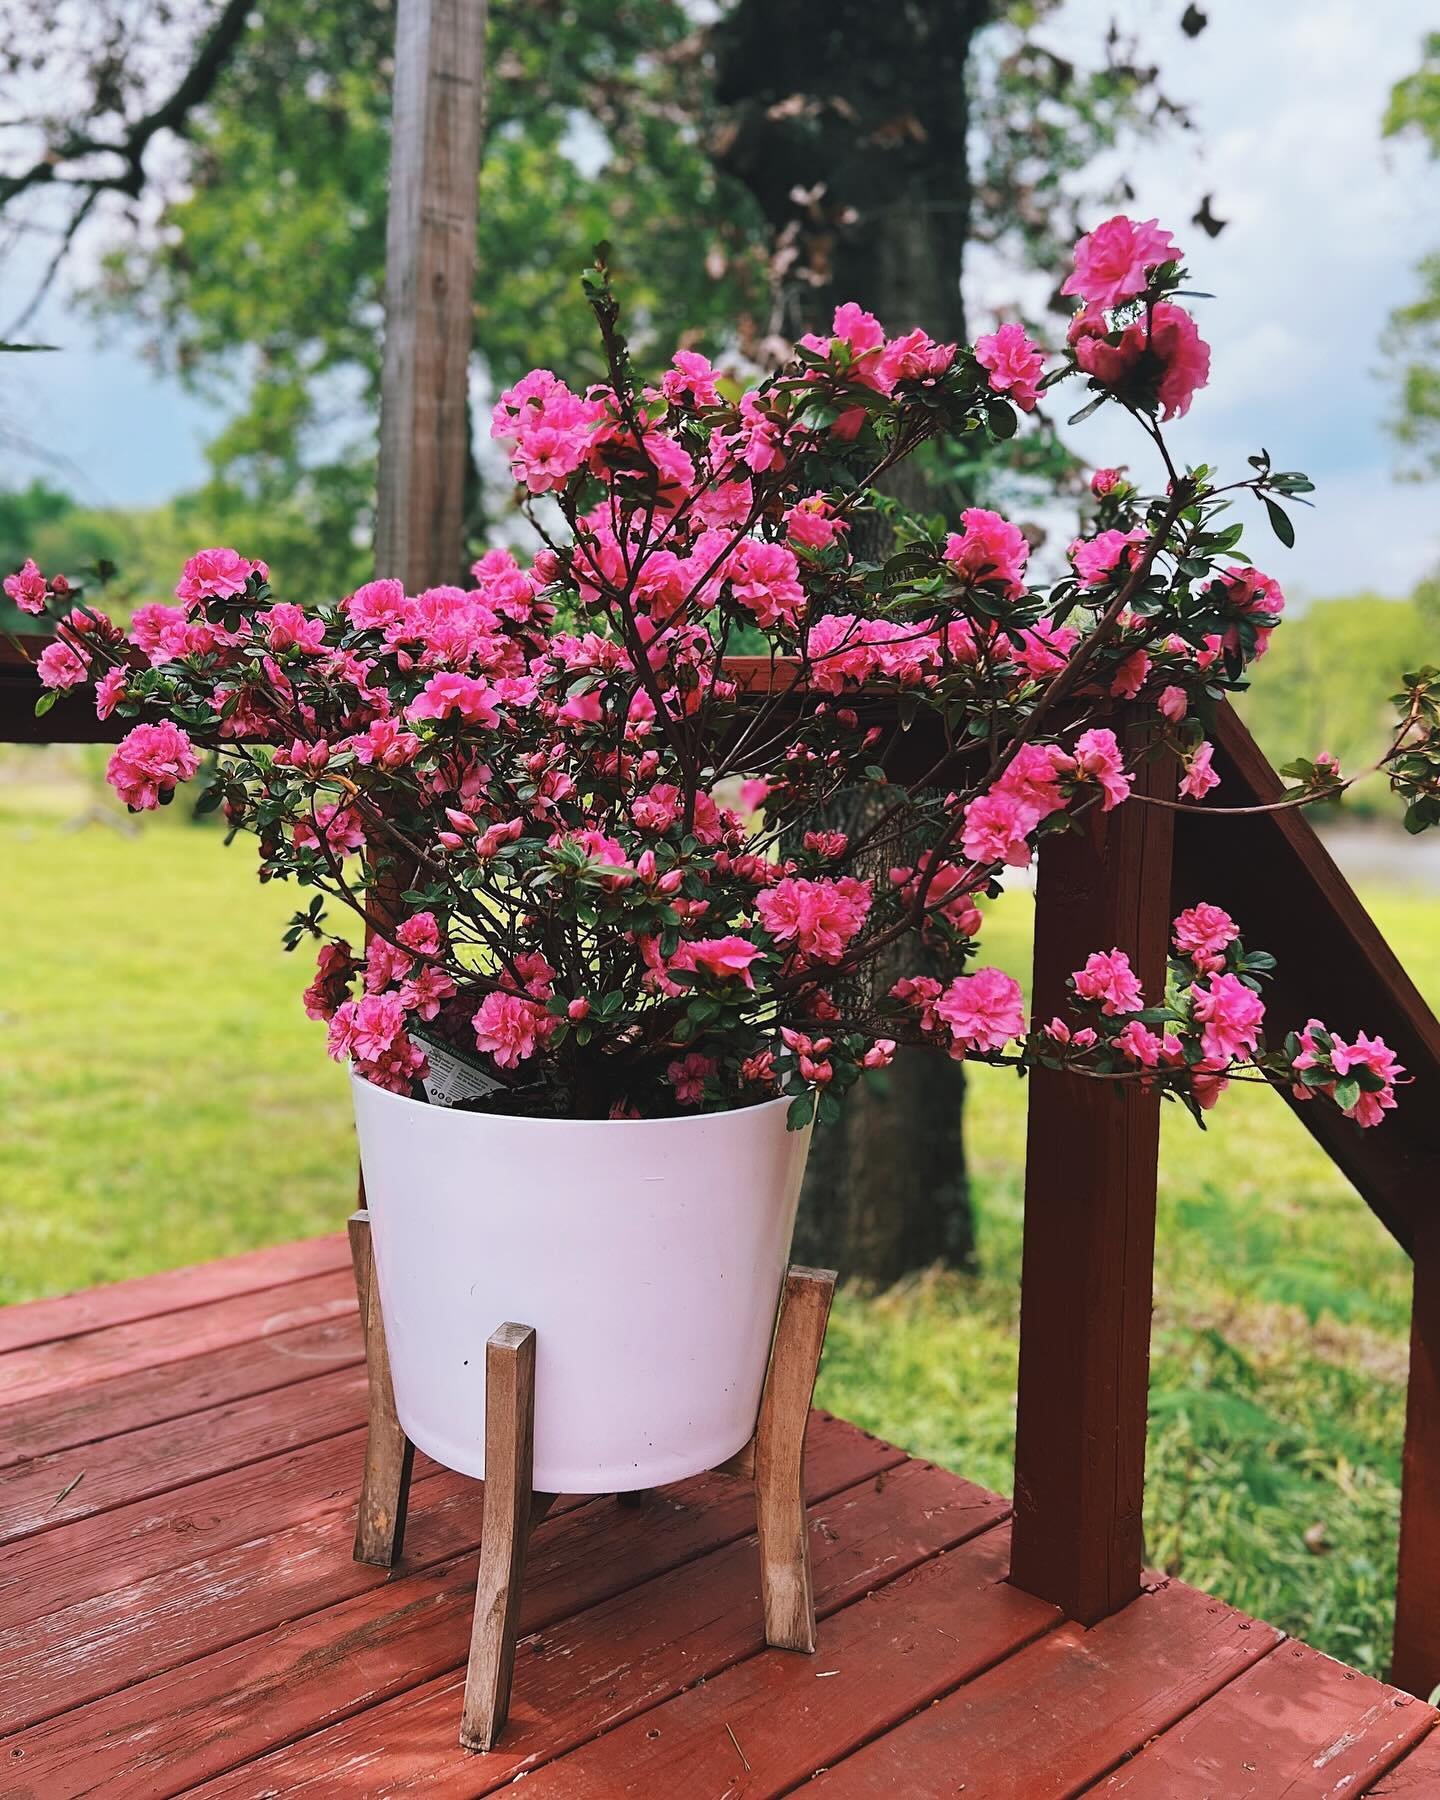 My azalea, which hardly bloomed at all last year, recently exploded with color. 🌸

#azaleas #bloom #spring #pink #easternoklahoma